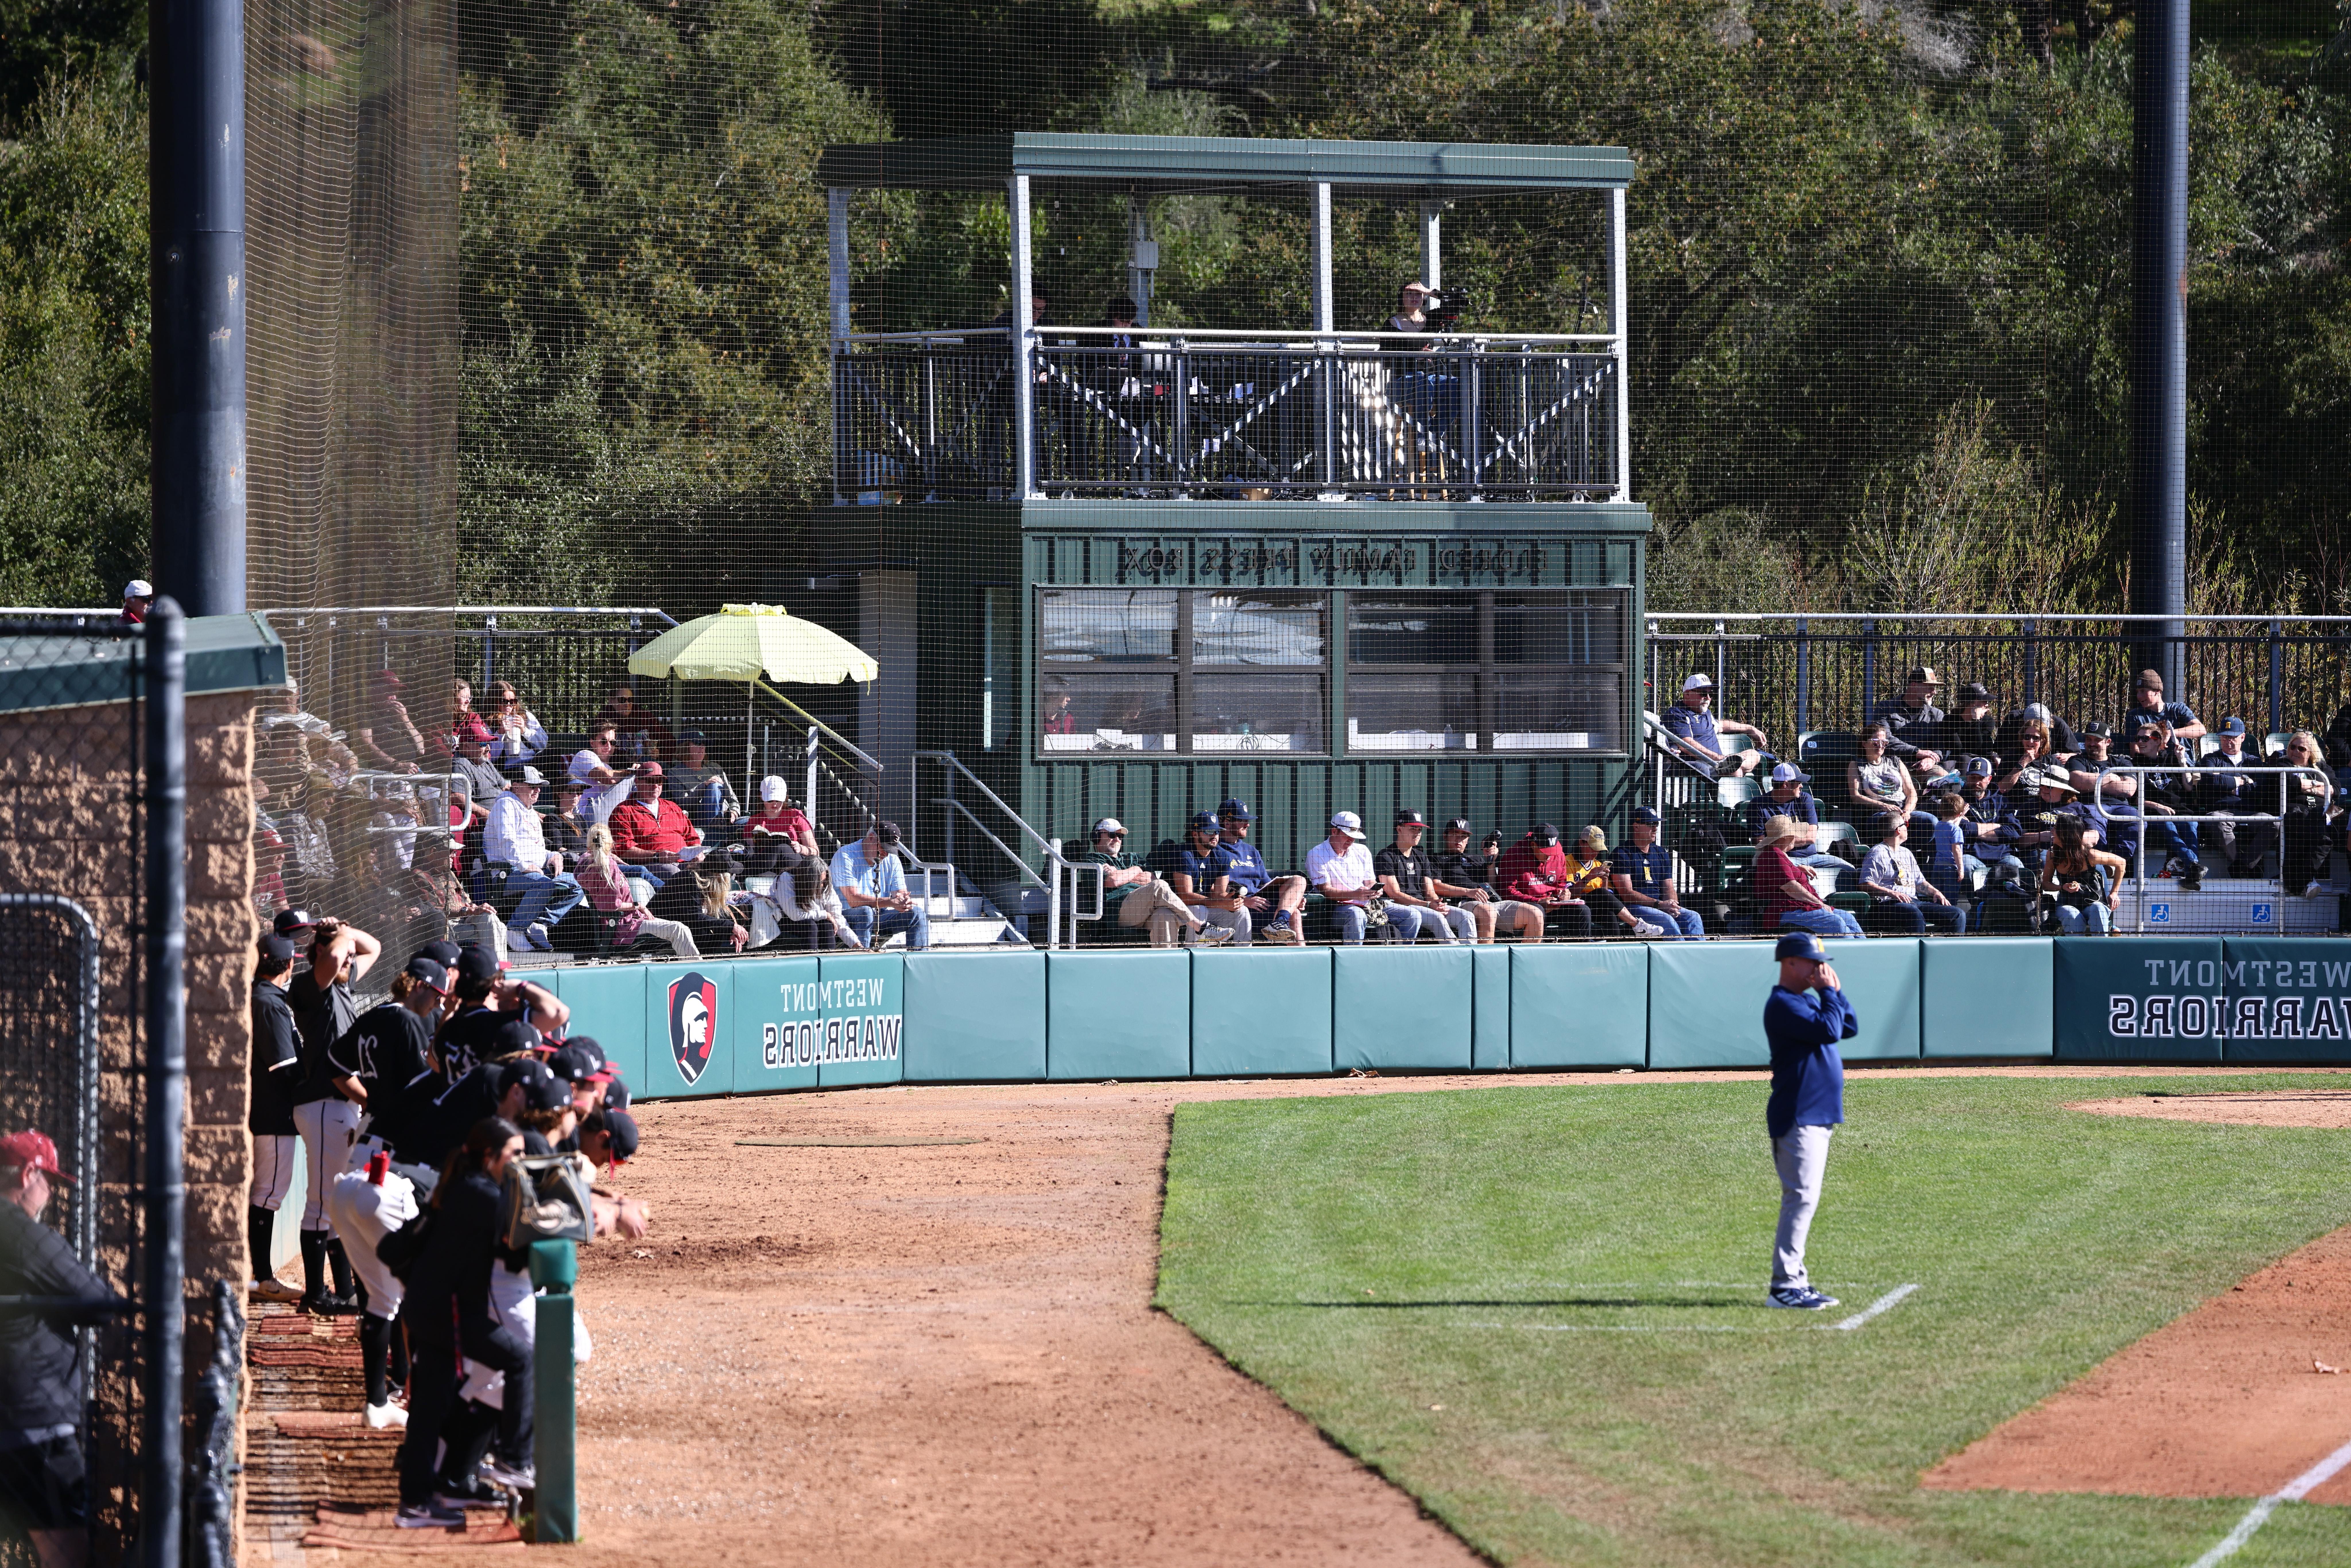 Baseball Supporters Add a Press Box and Grandstand